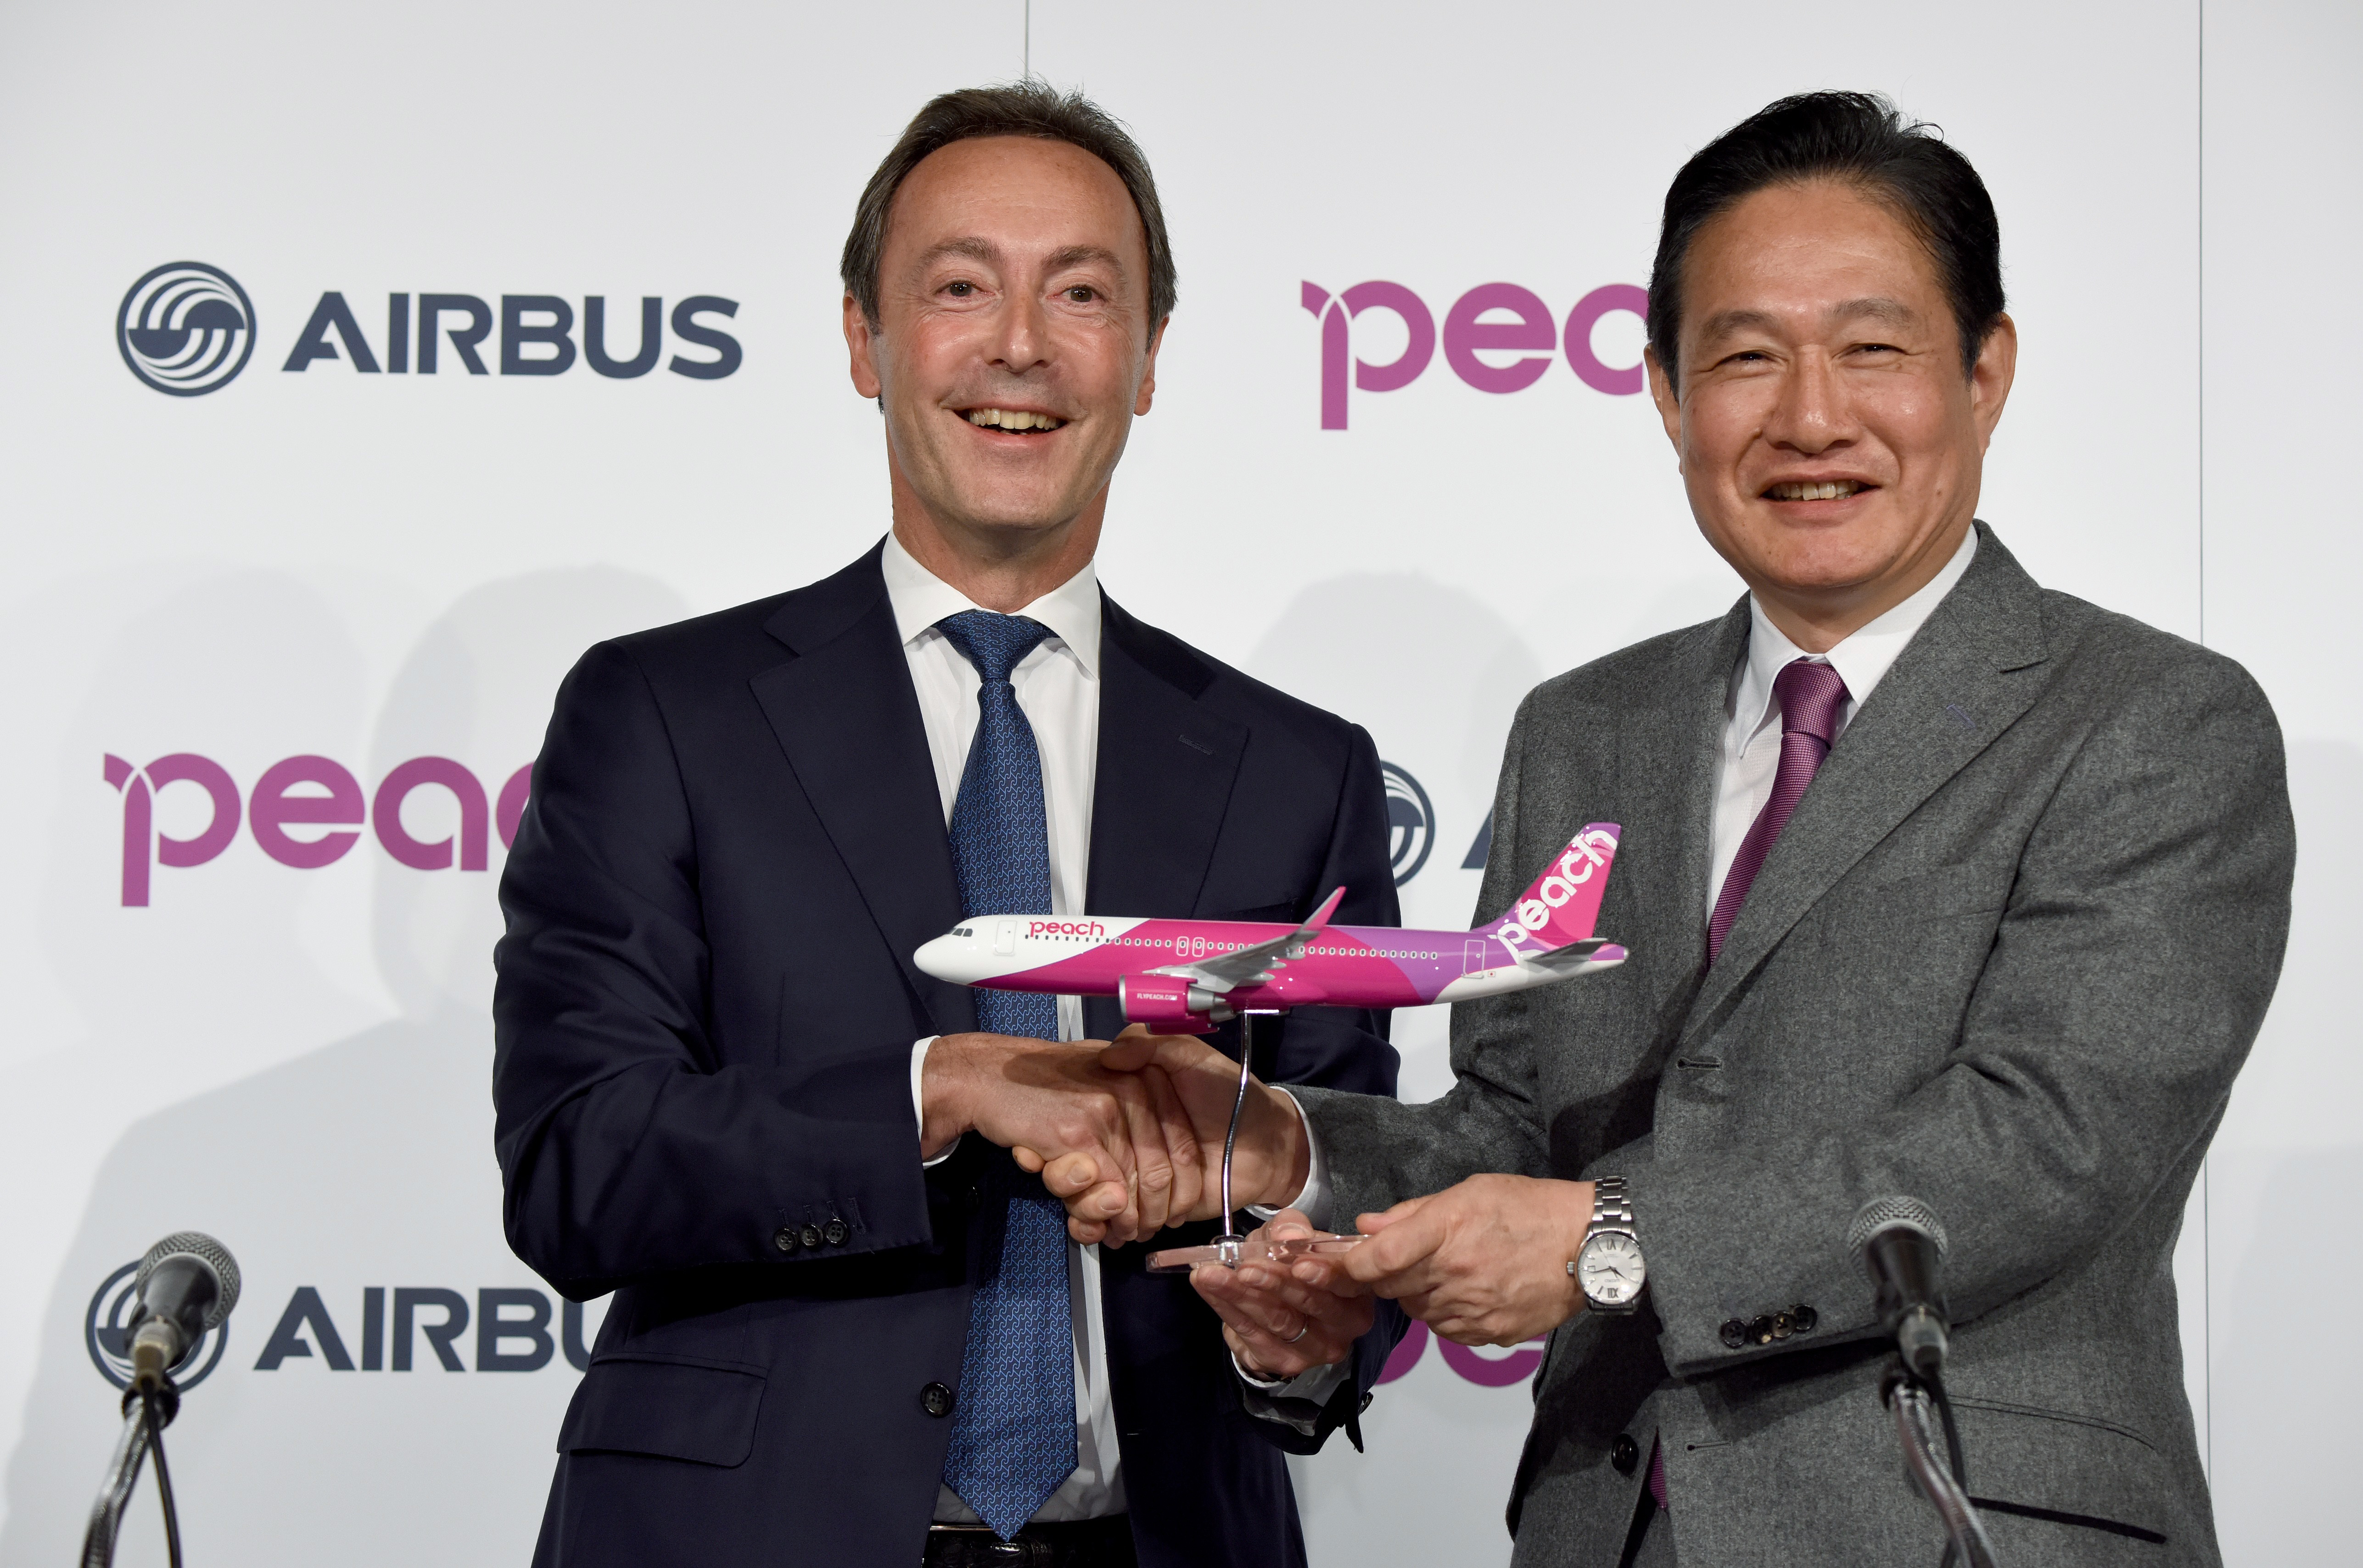 Airbus ECO Fabrice Bregier (L) shakes hands with CEO of Japan's low cost carrier Peach Aviation Shinichi Inoue during a joint press conference in Tokyo on November 18, 2016.  Japanese low-cost carrier Peach Aviation said on November 18 it would buy 13 Airbus aircraft valued at almost $1.4 billion as part of its expansion plans to cash in on a pick-up in demand for air travel in the country. / AFP PHOTO / TORU YAMANAKA